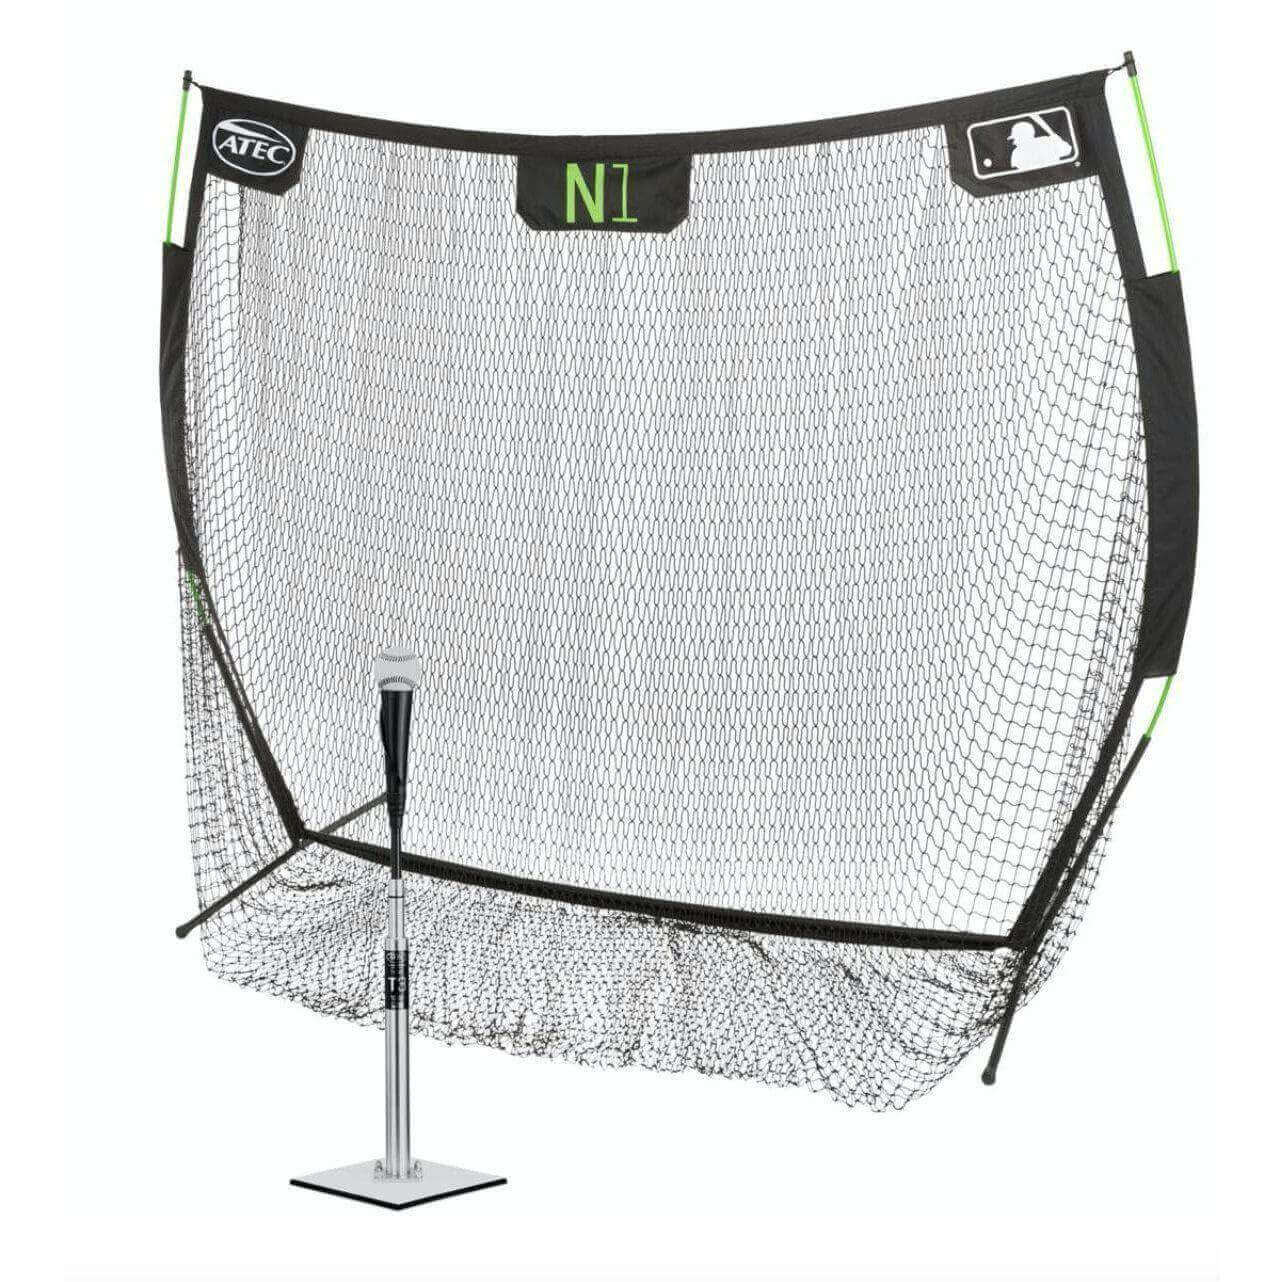 ATEC T3 Professional Batting Tee With The N1 Net